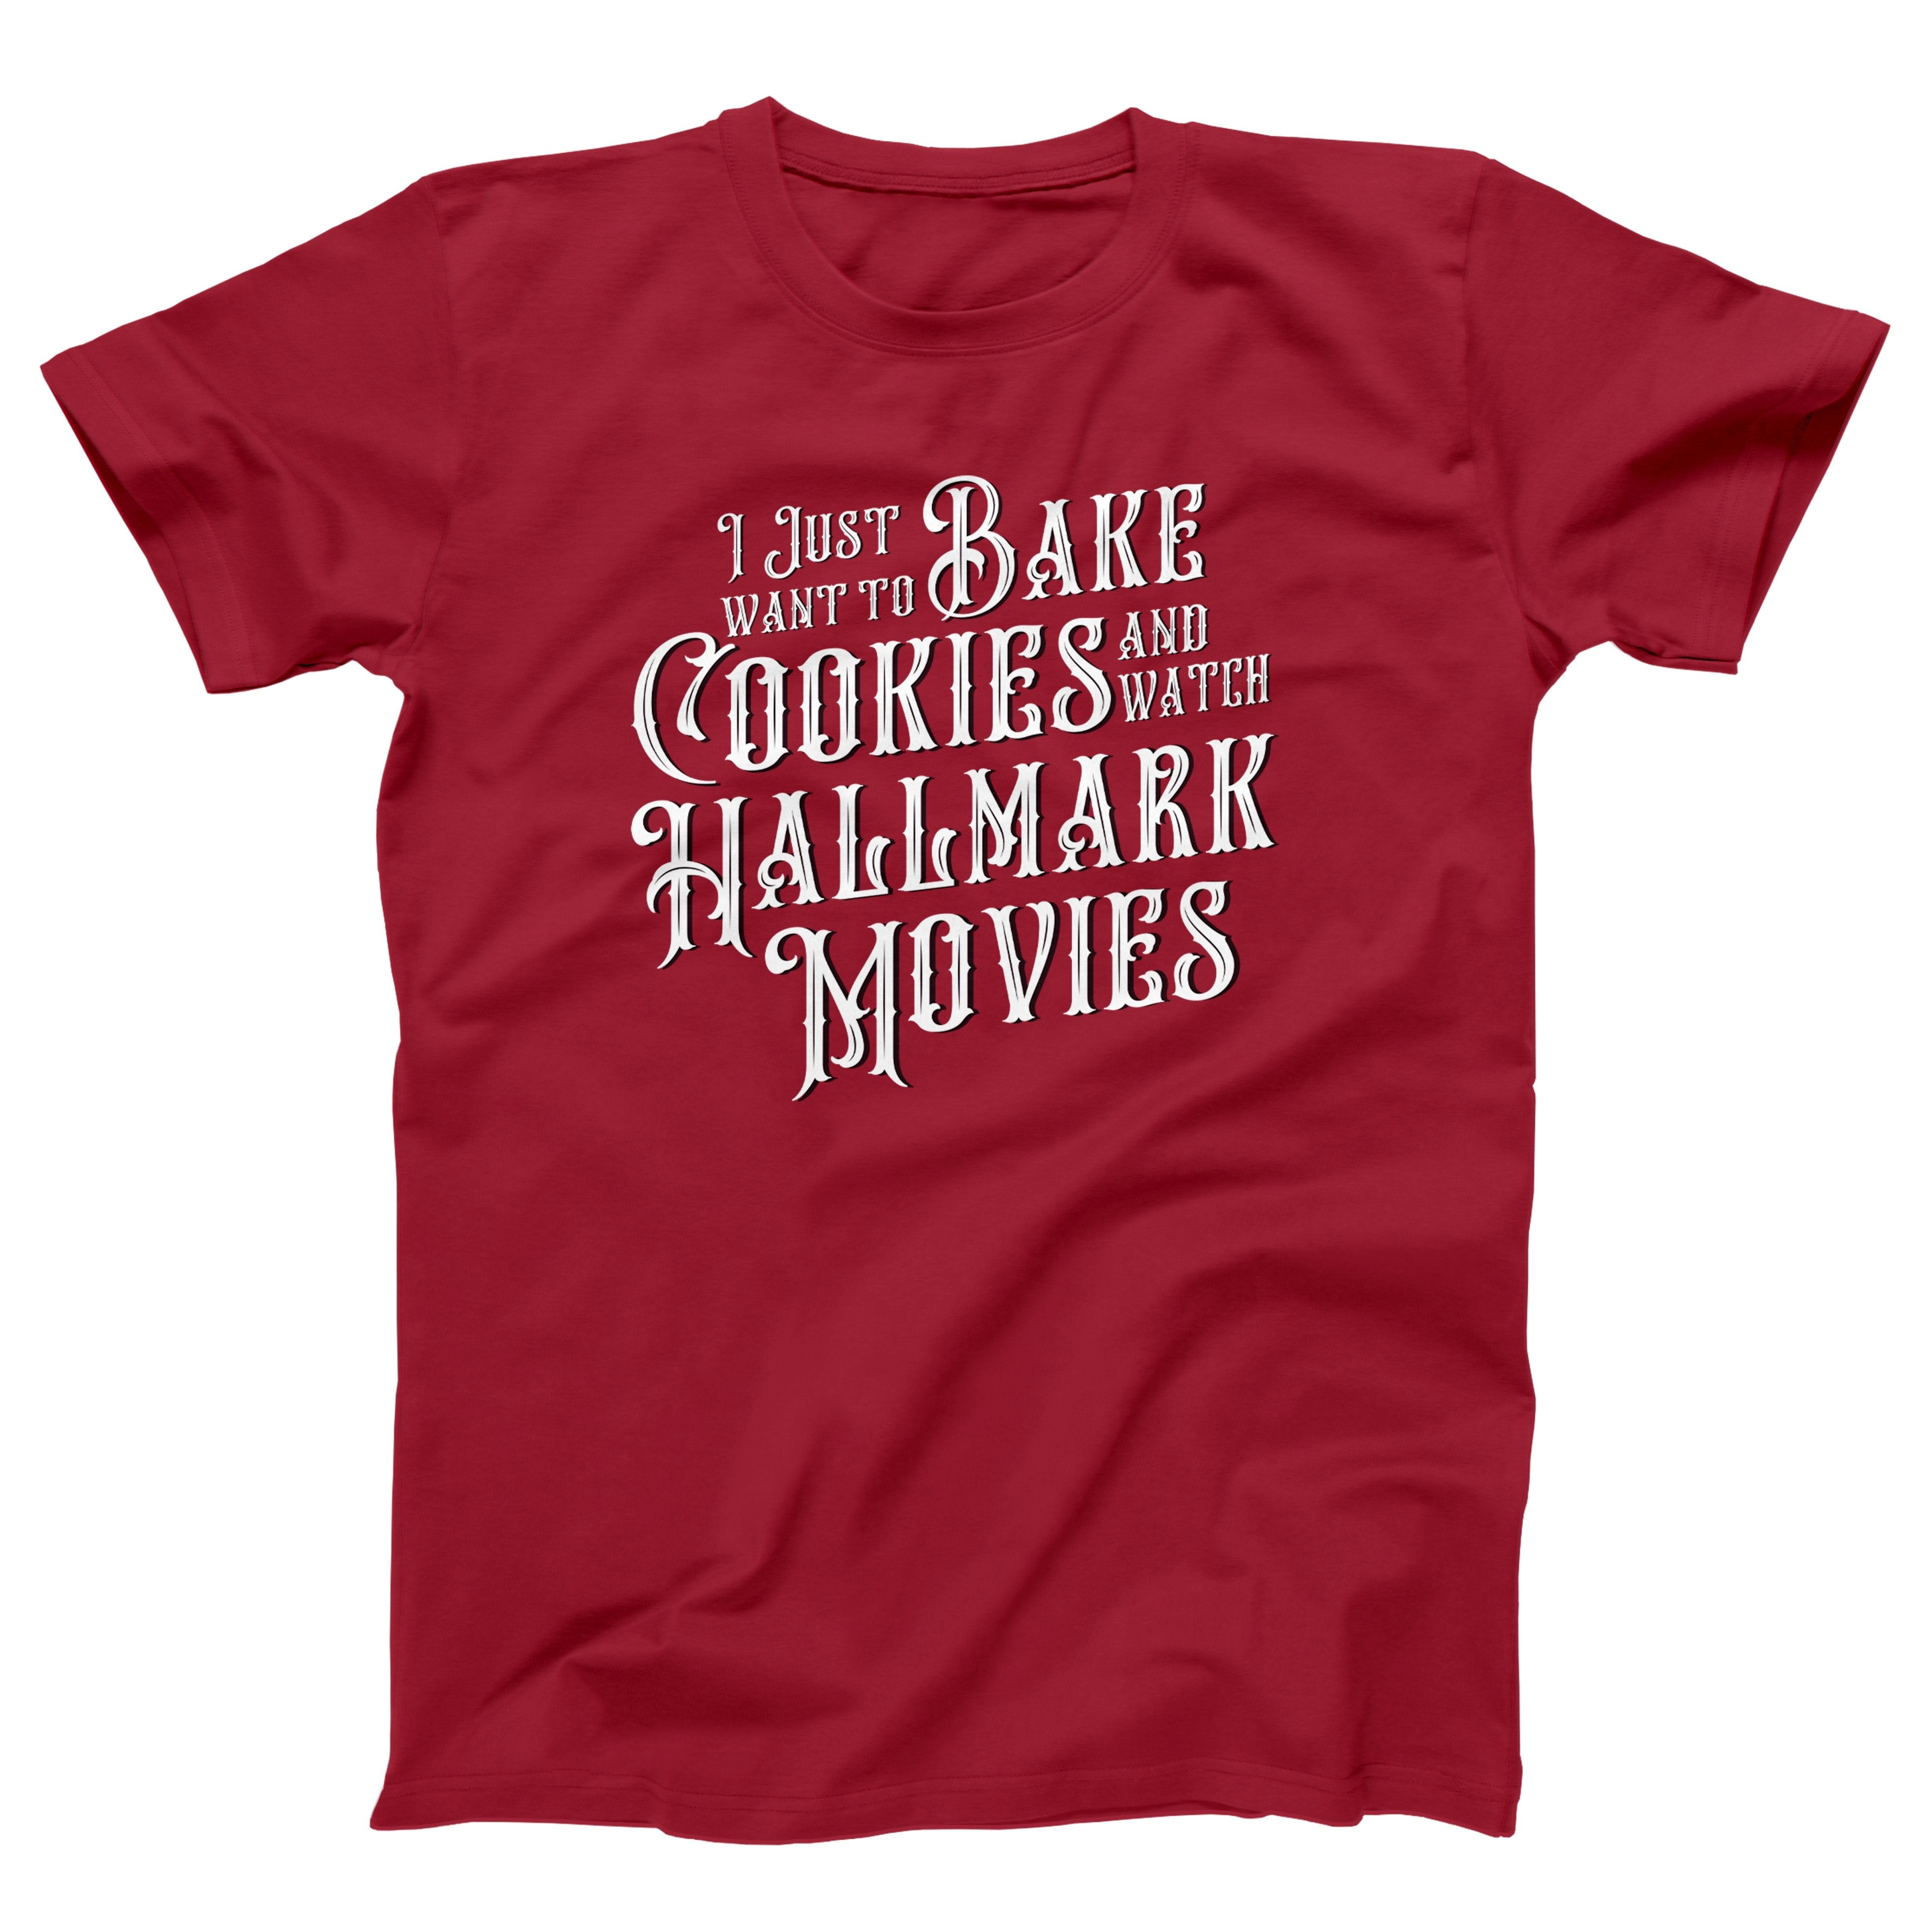 I just want to bake stuff and watch hallmark christmas movies cooking baking  design png shirt - teejeep